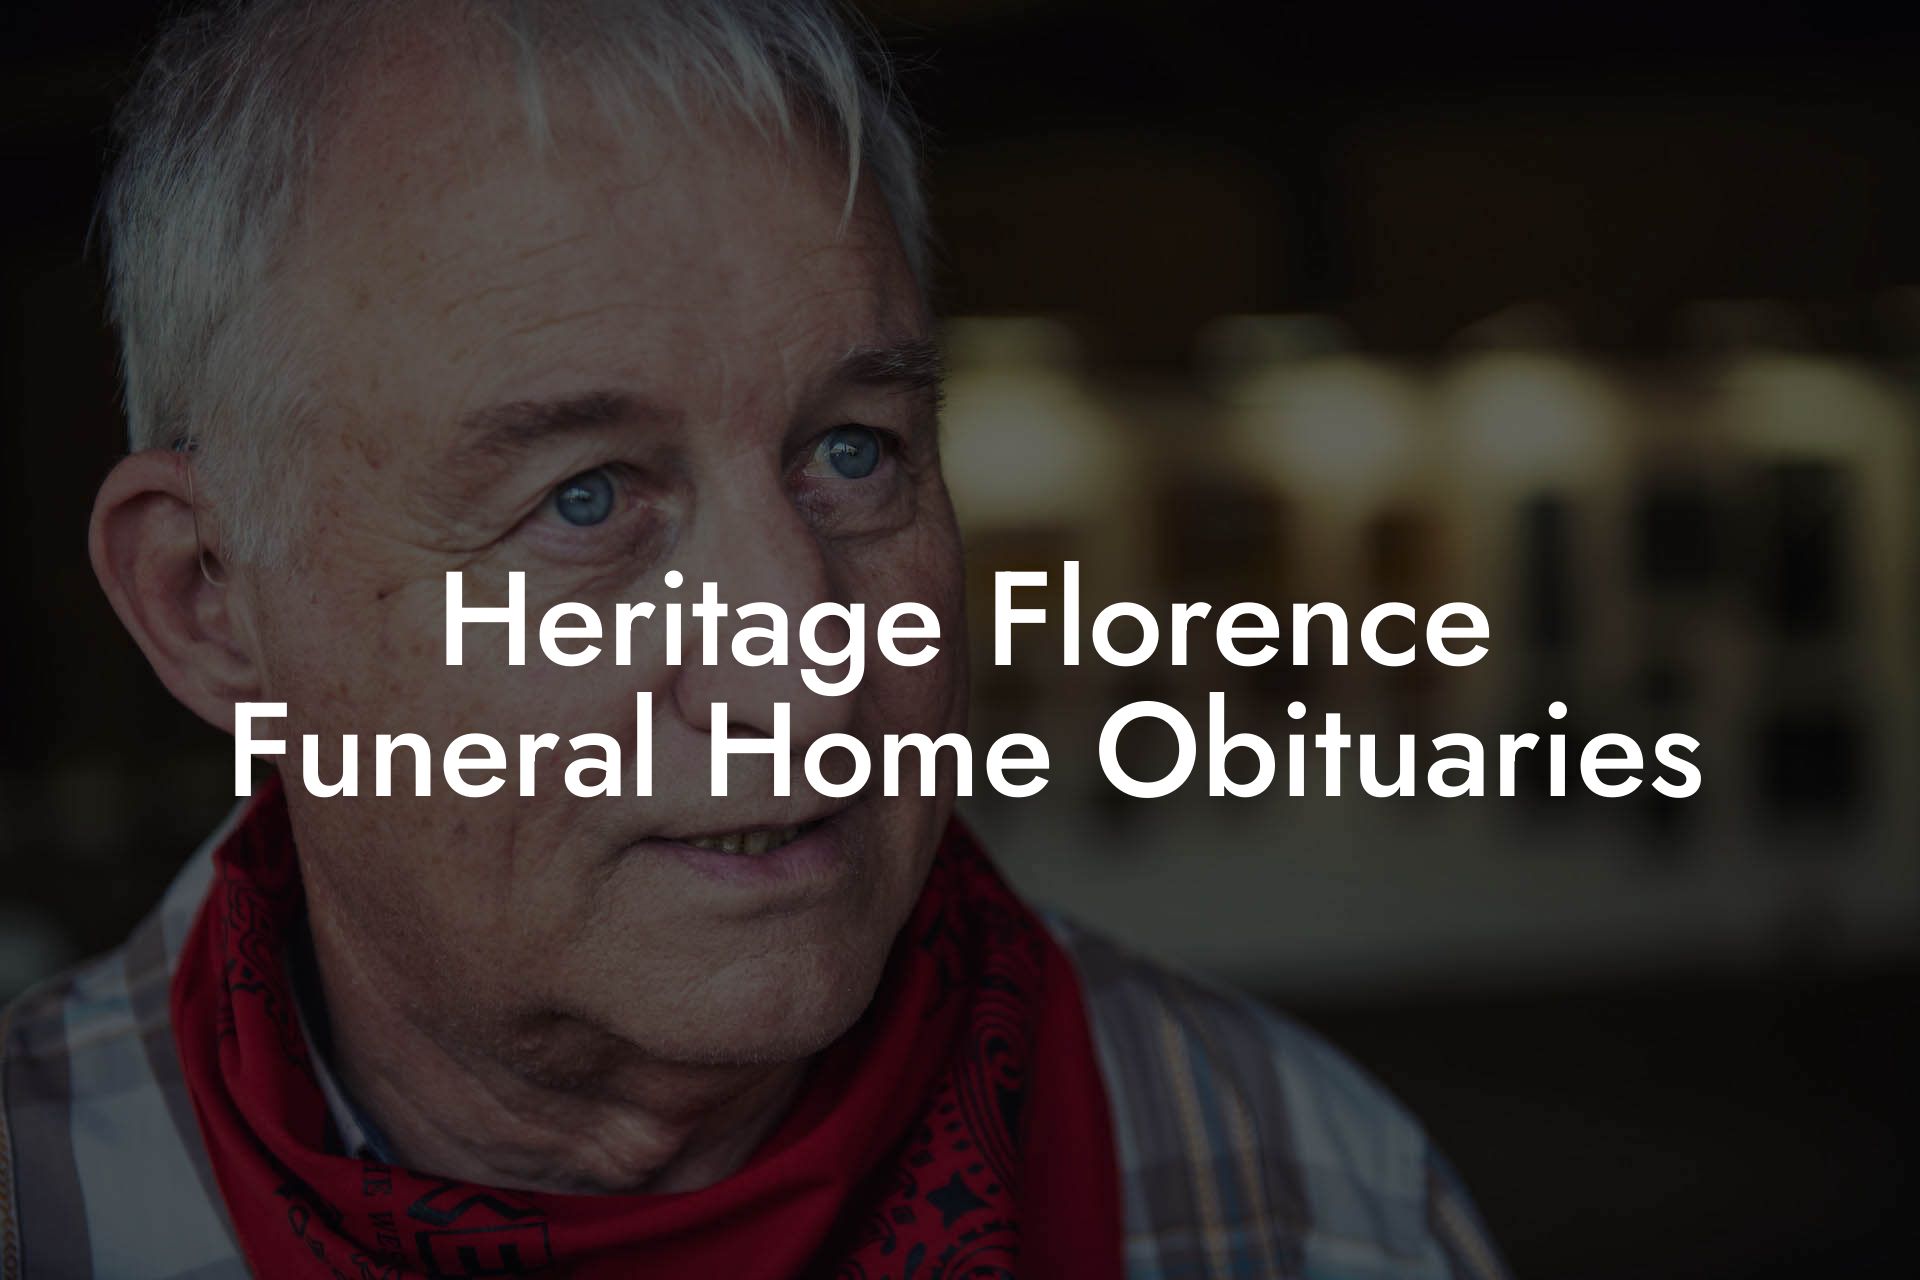 Heritage Florence Funeral Home Obituaries